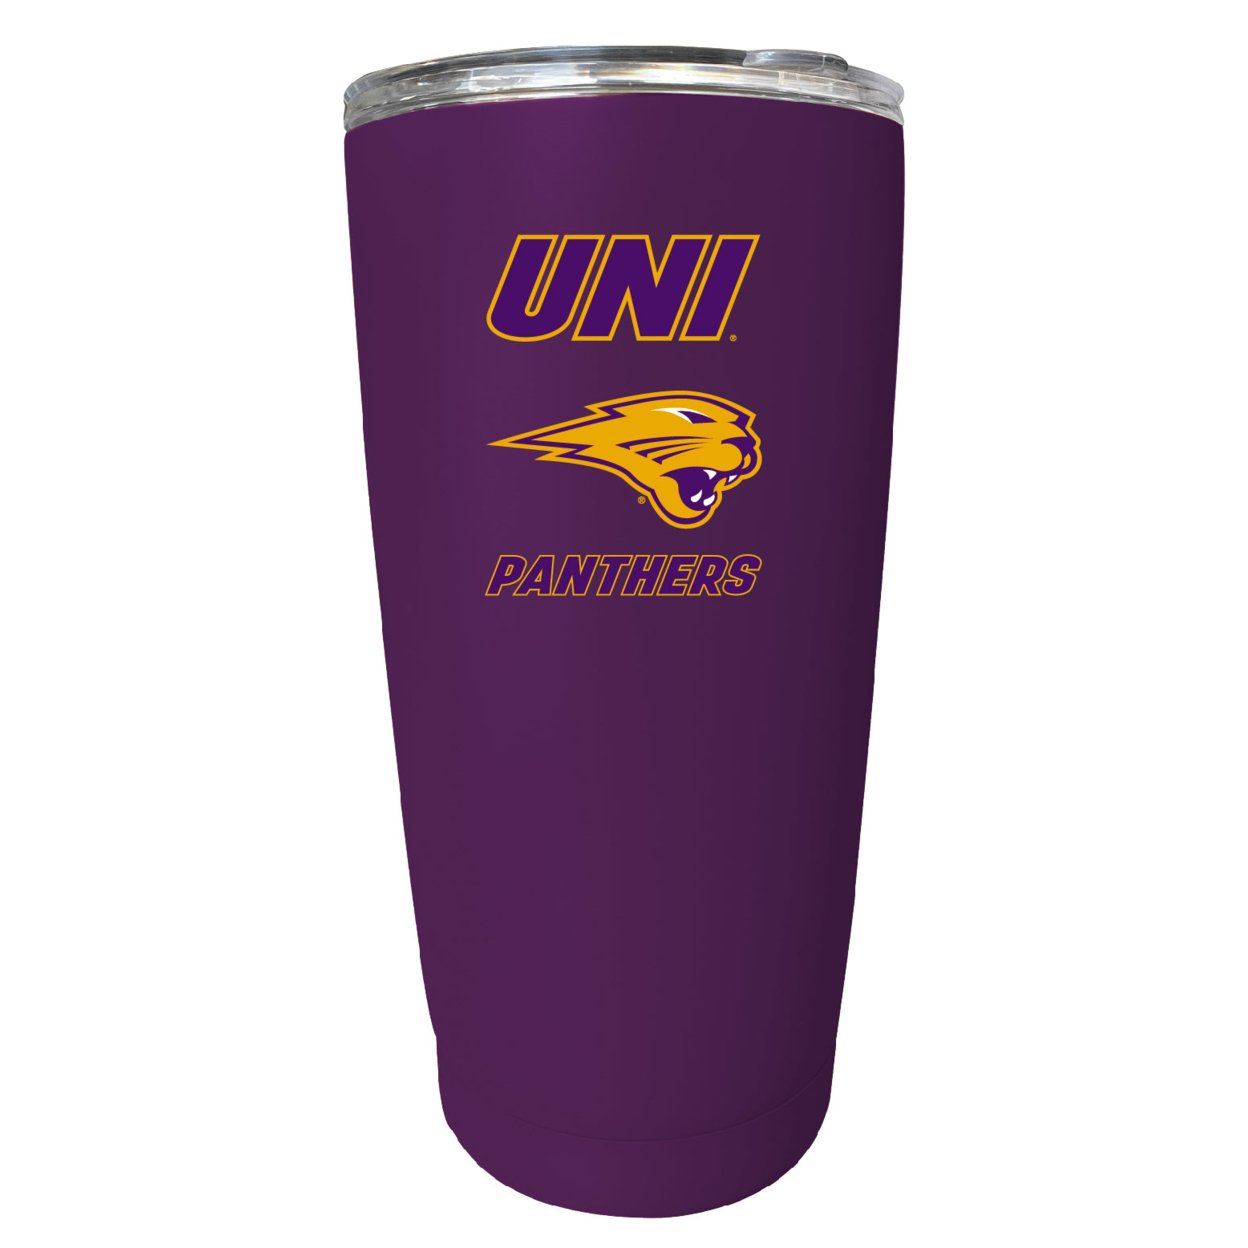 Northern Iowa Panthers 16 Oz Stainless Steel Insulated Tumbler - Yellow